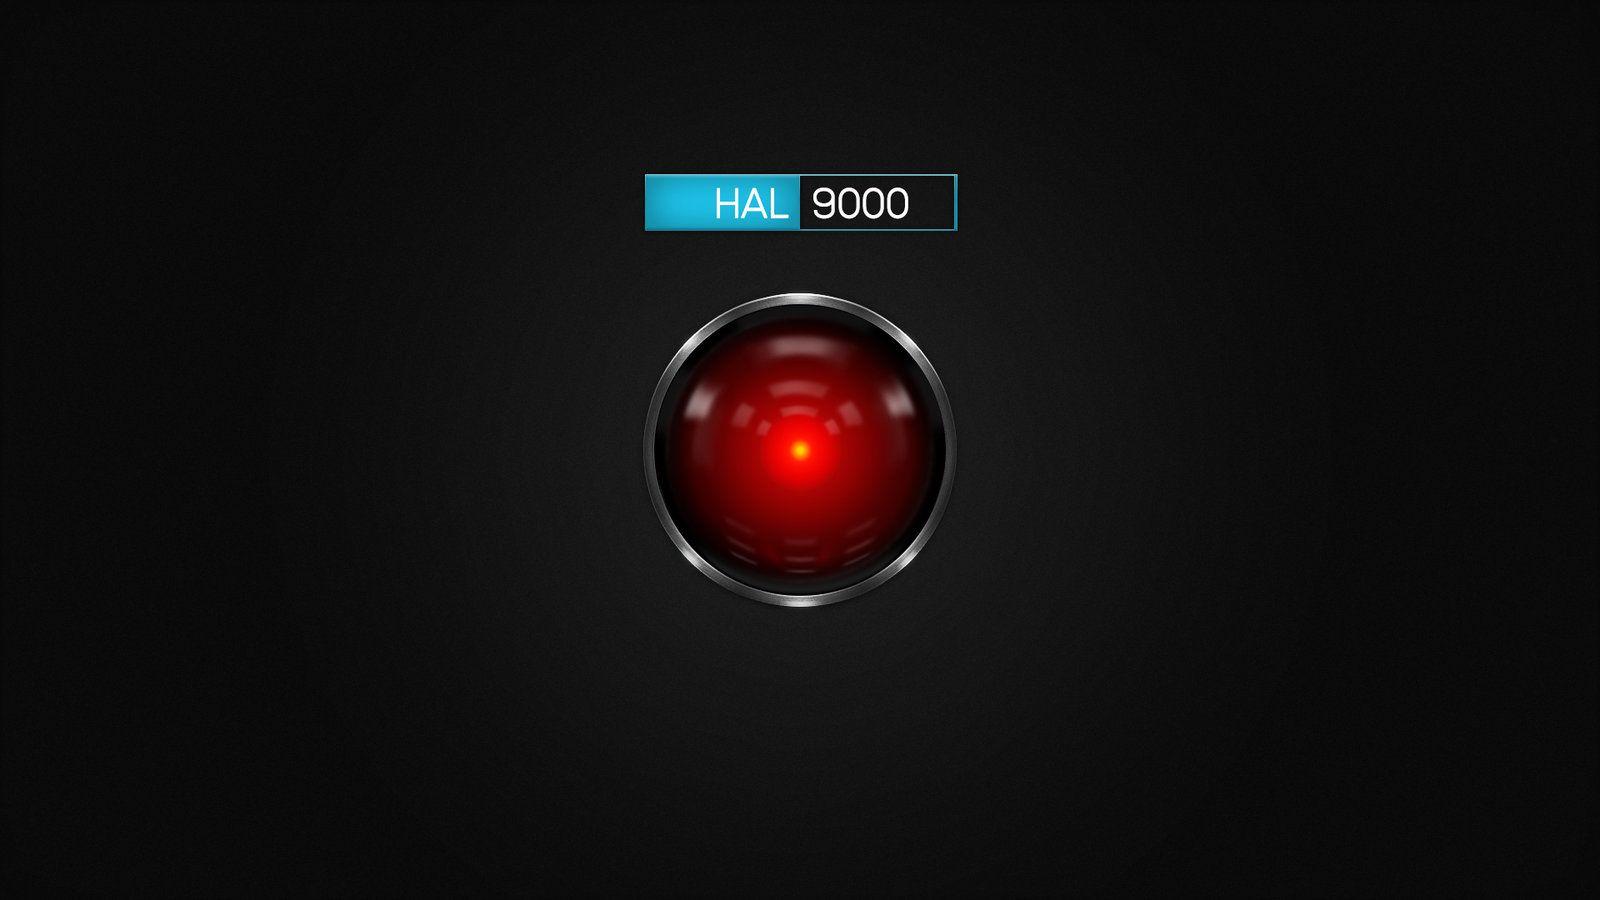 Hal 9000 screensaver advanced edition 4 0 download free trial